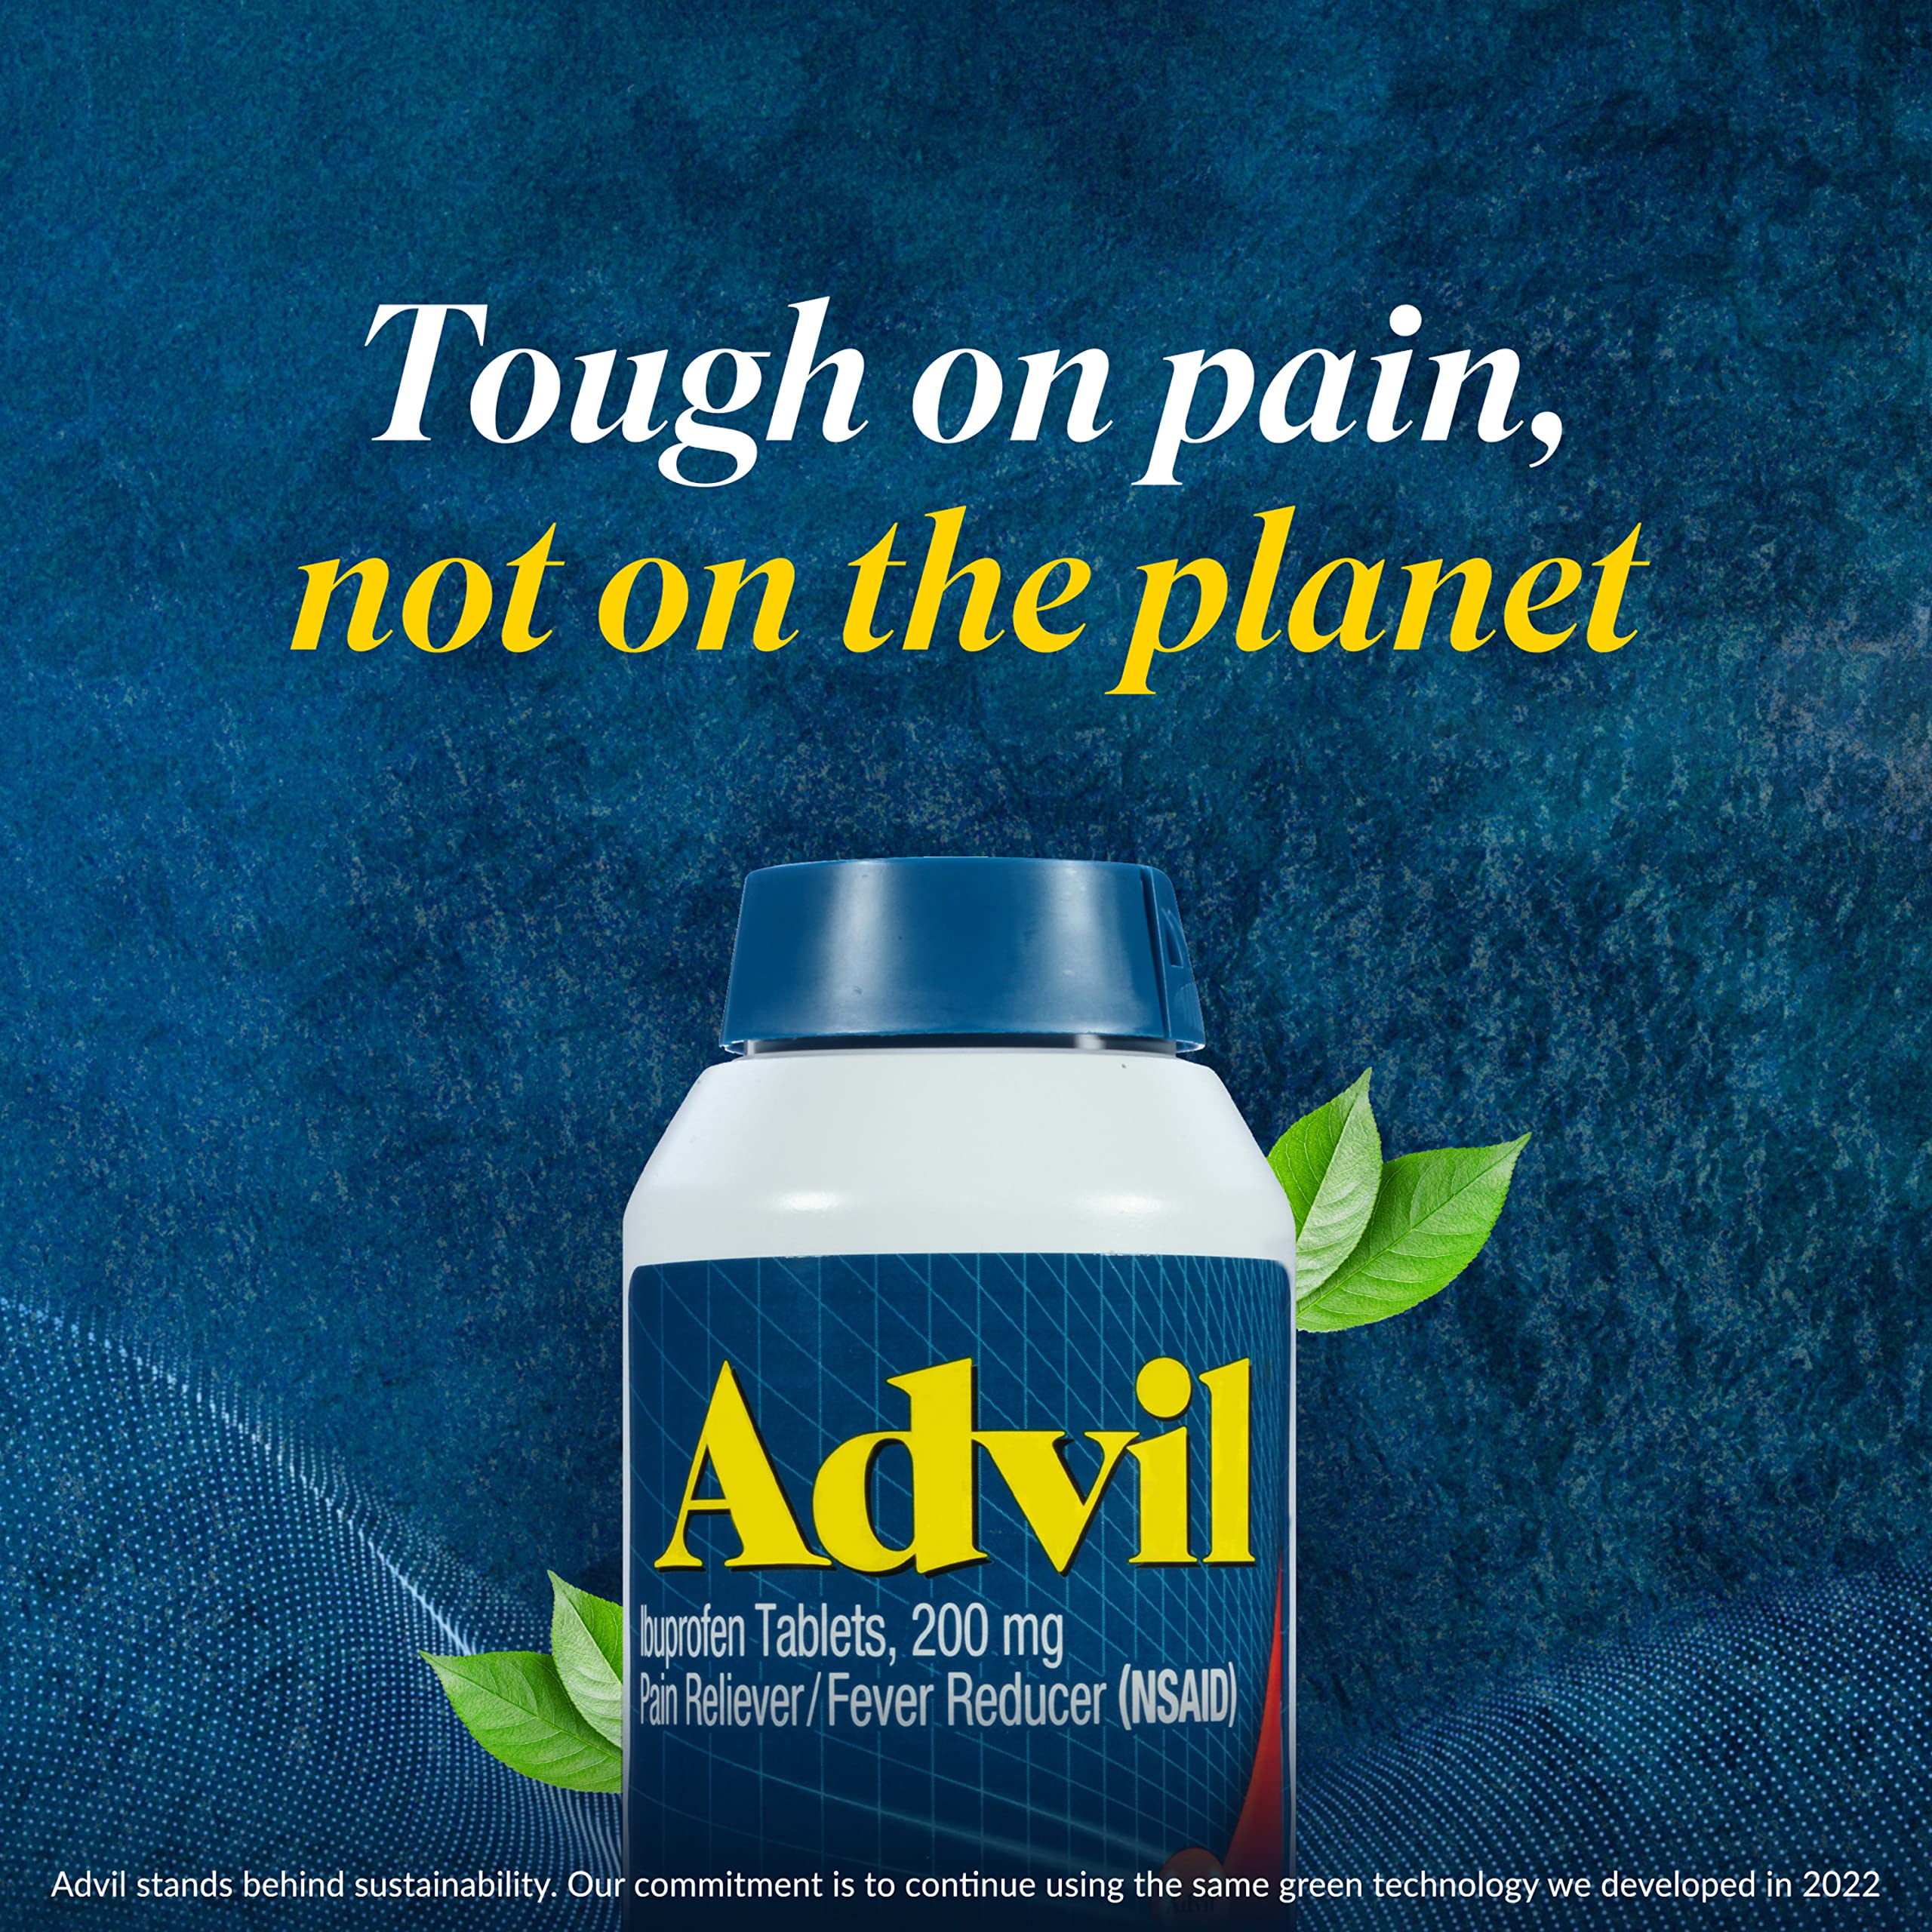 Advil Pain Reliever and Fever Reducer, Pain Relief Medicine with Ibuprofen 200mg for Headache, Backache, Menstrual Pain and Joint Pain Relief - 50x2 Coated Tablets